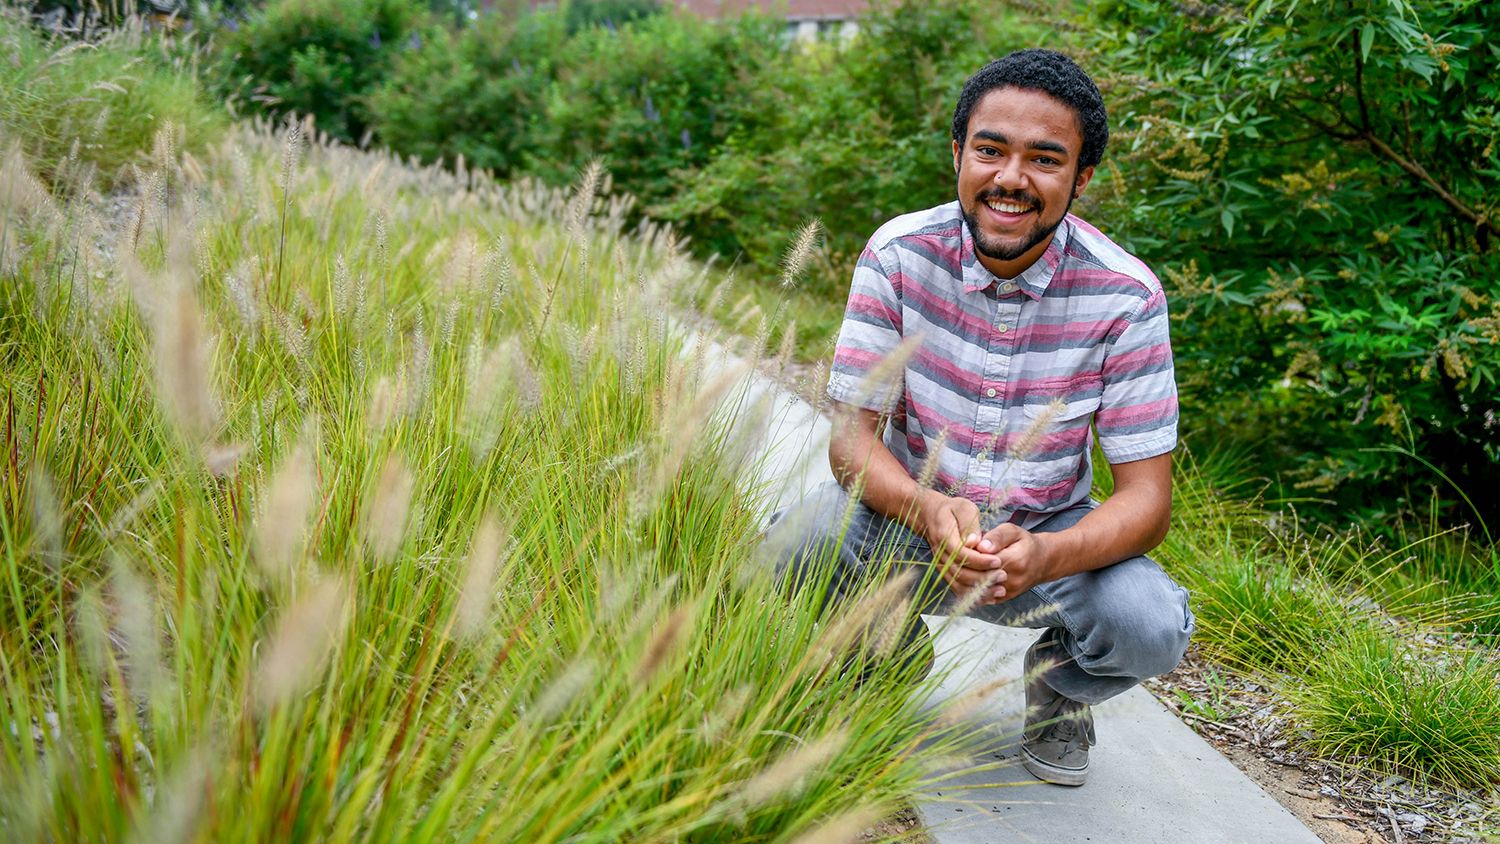 Student on a paved path, squatting down near ornamental grass.